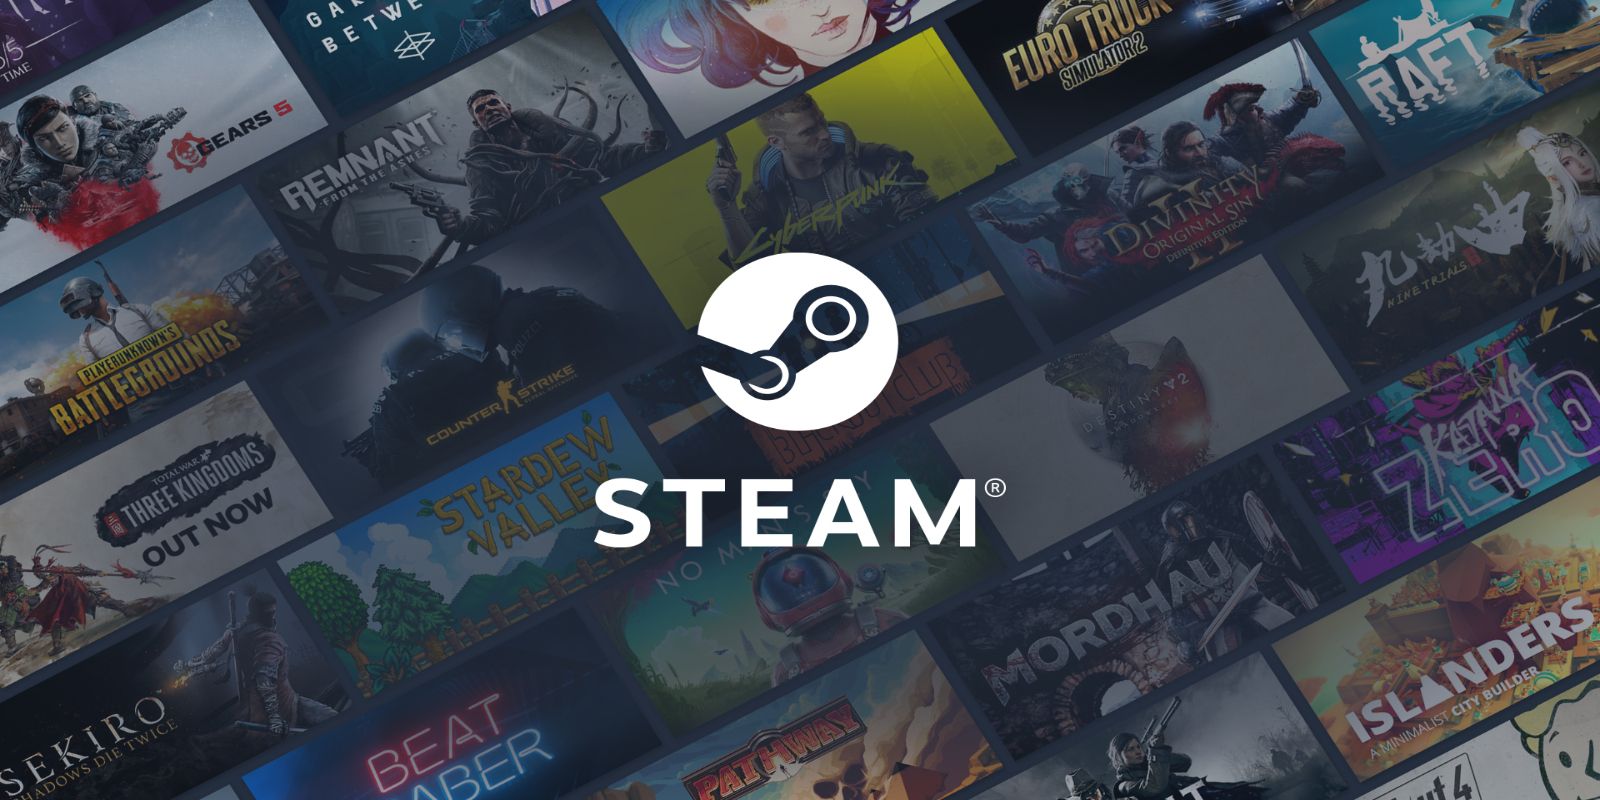 Image of Steam front page